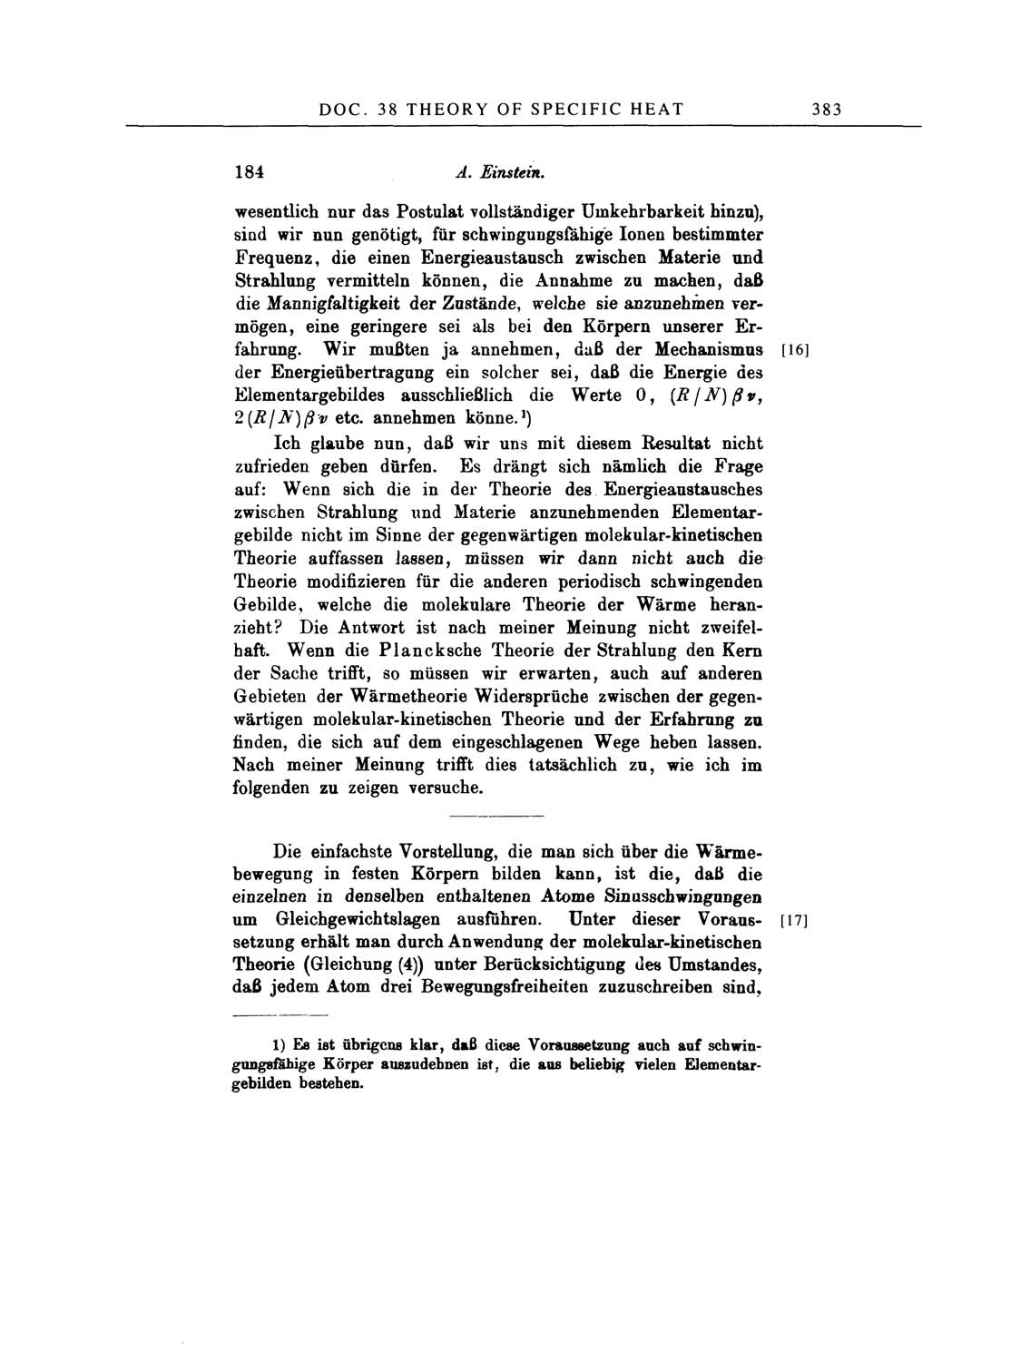 Volume 2: The Swiss Years: Writings, 1900-1909 page 383